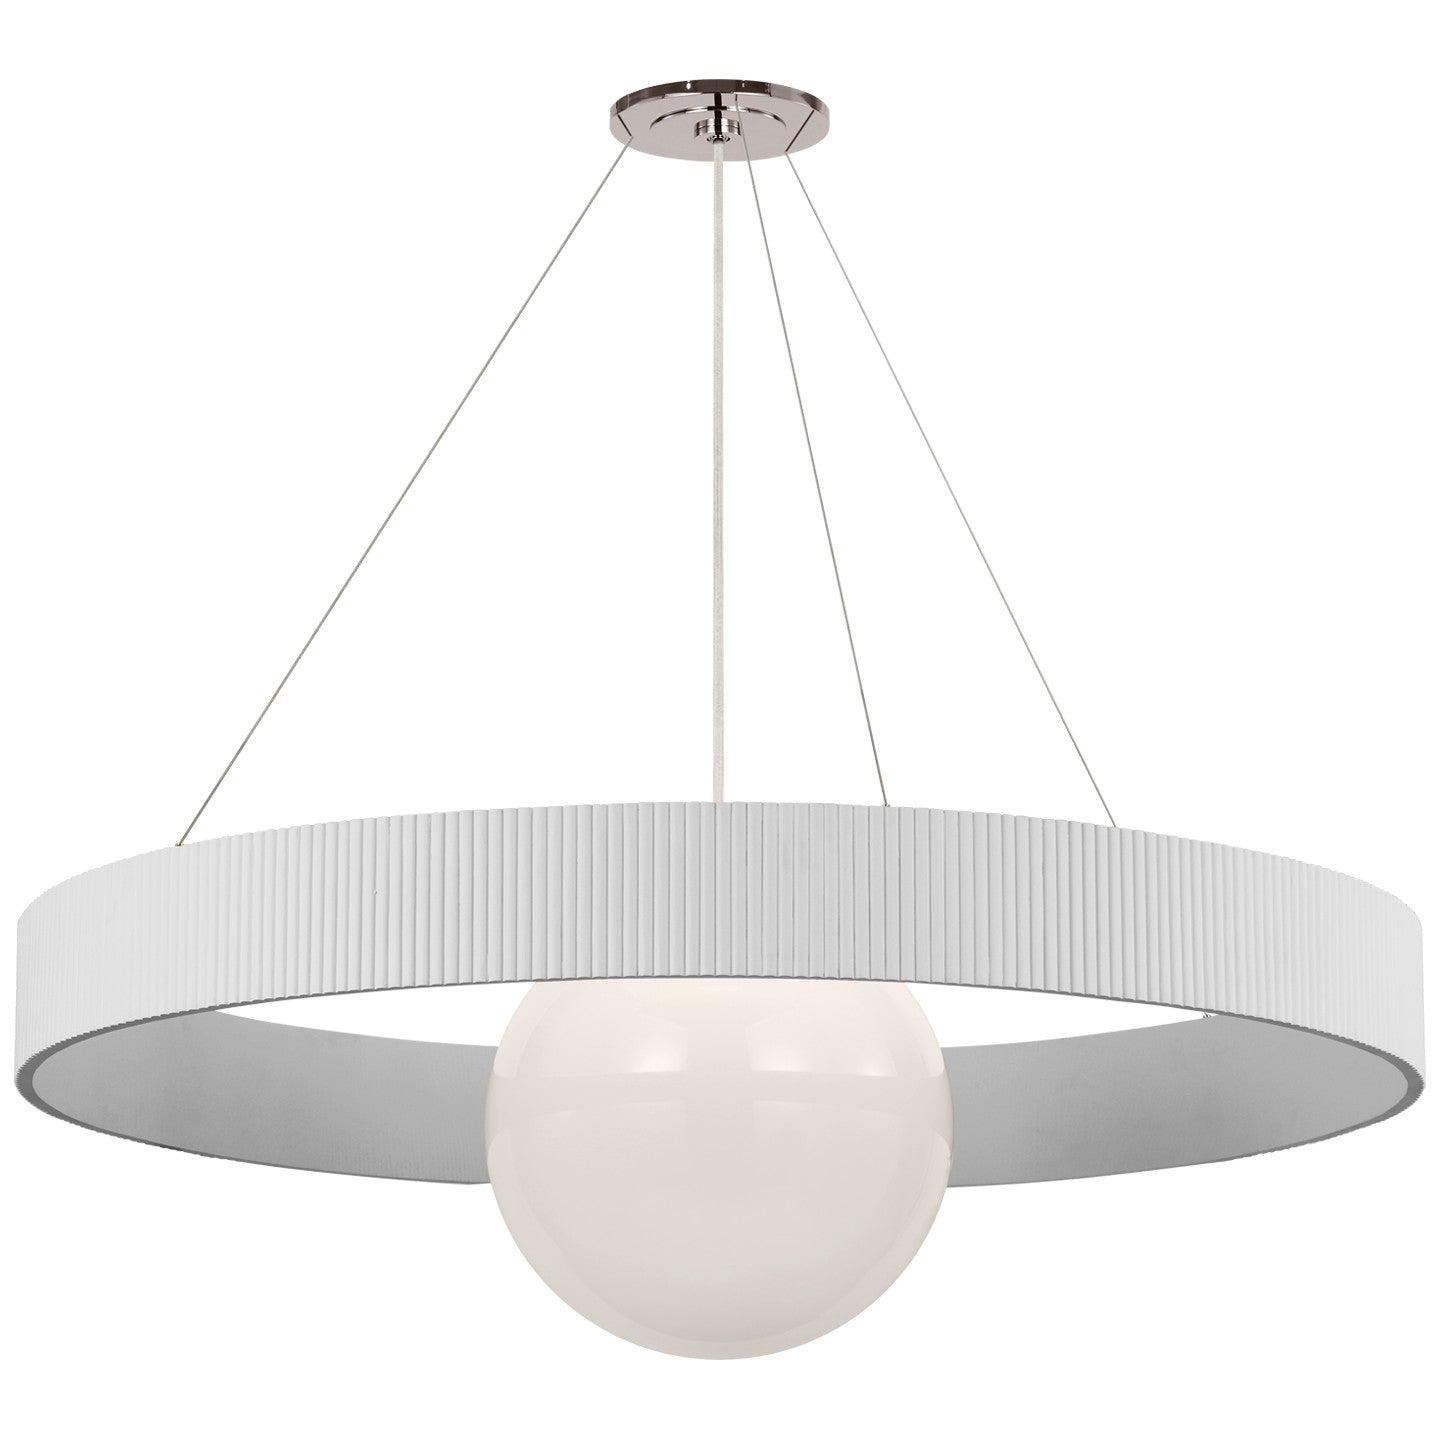 Visual Comfort Signature Canada - LED Chandelier - Arena - Polished Nickel and White Glass- Union Lighting Luminaires Decor